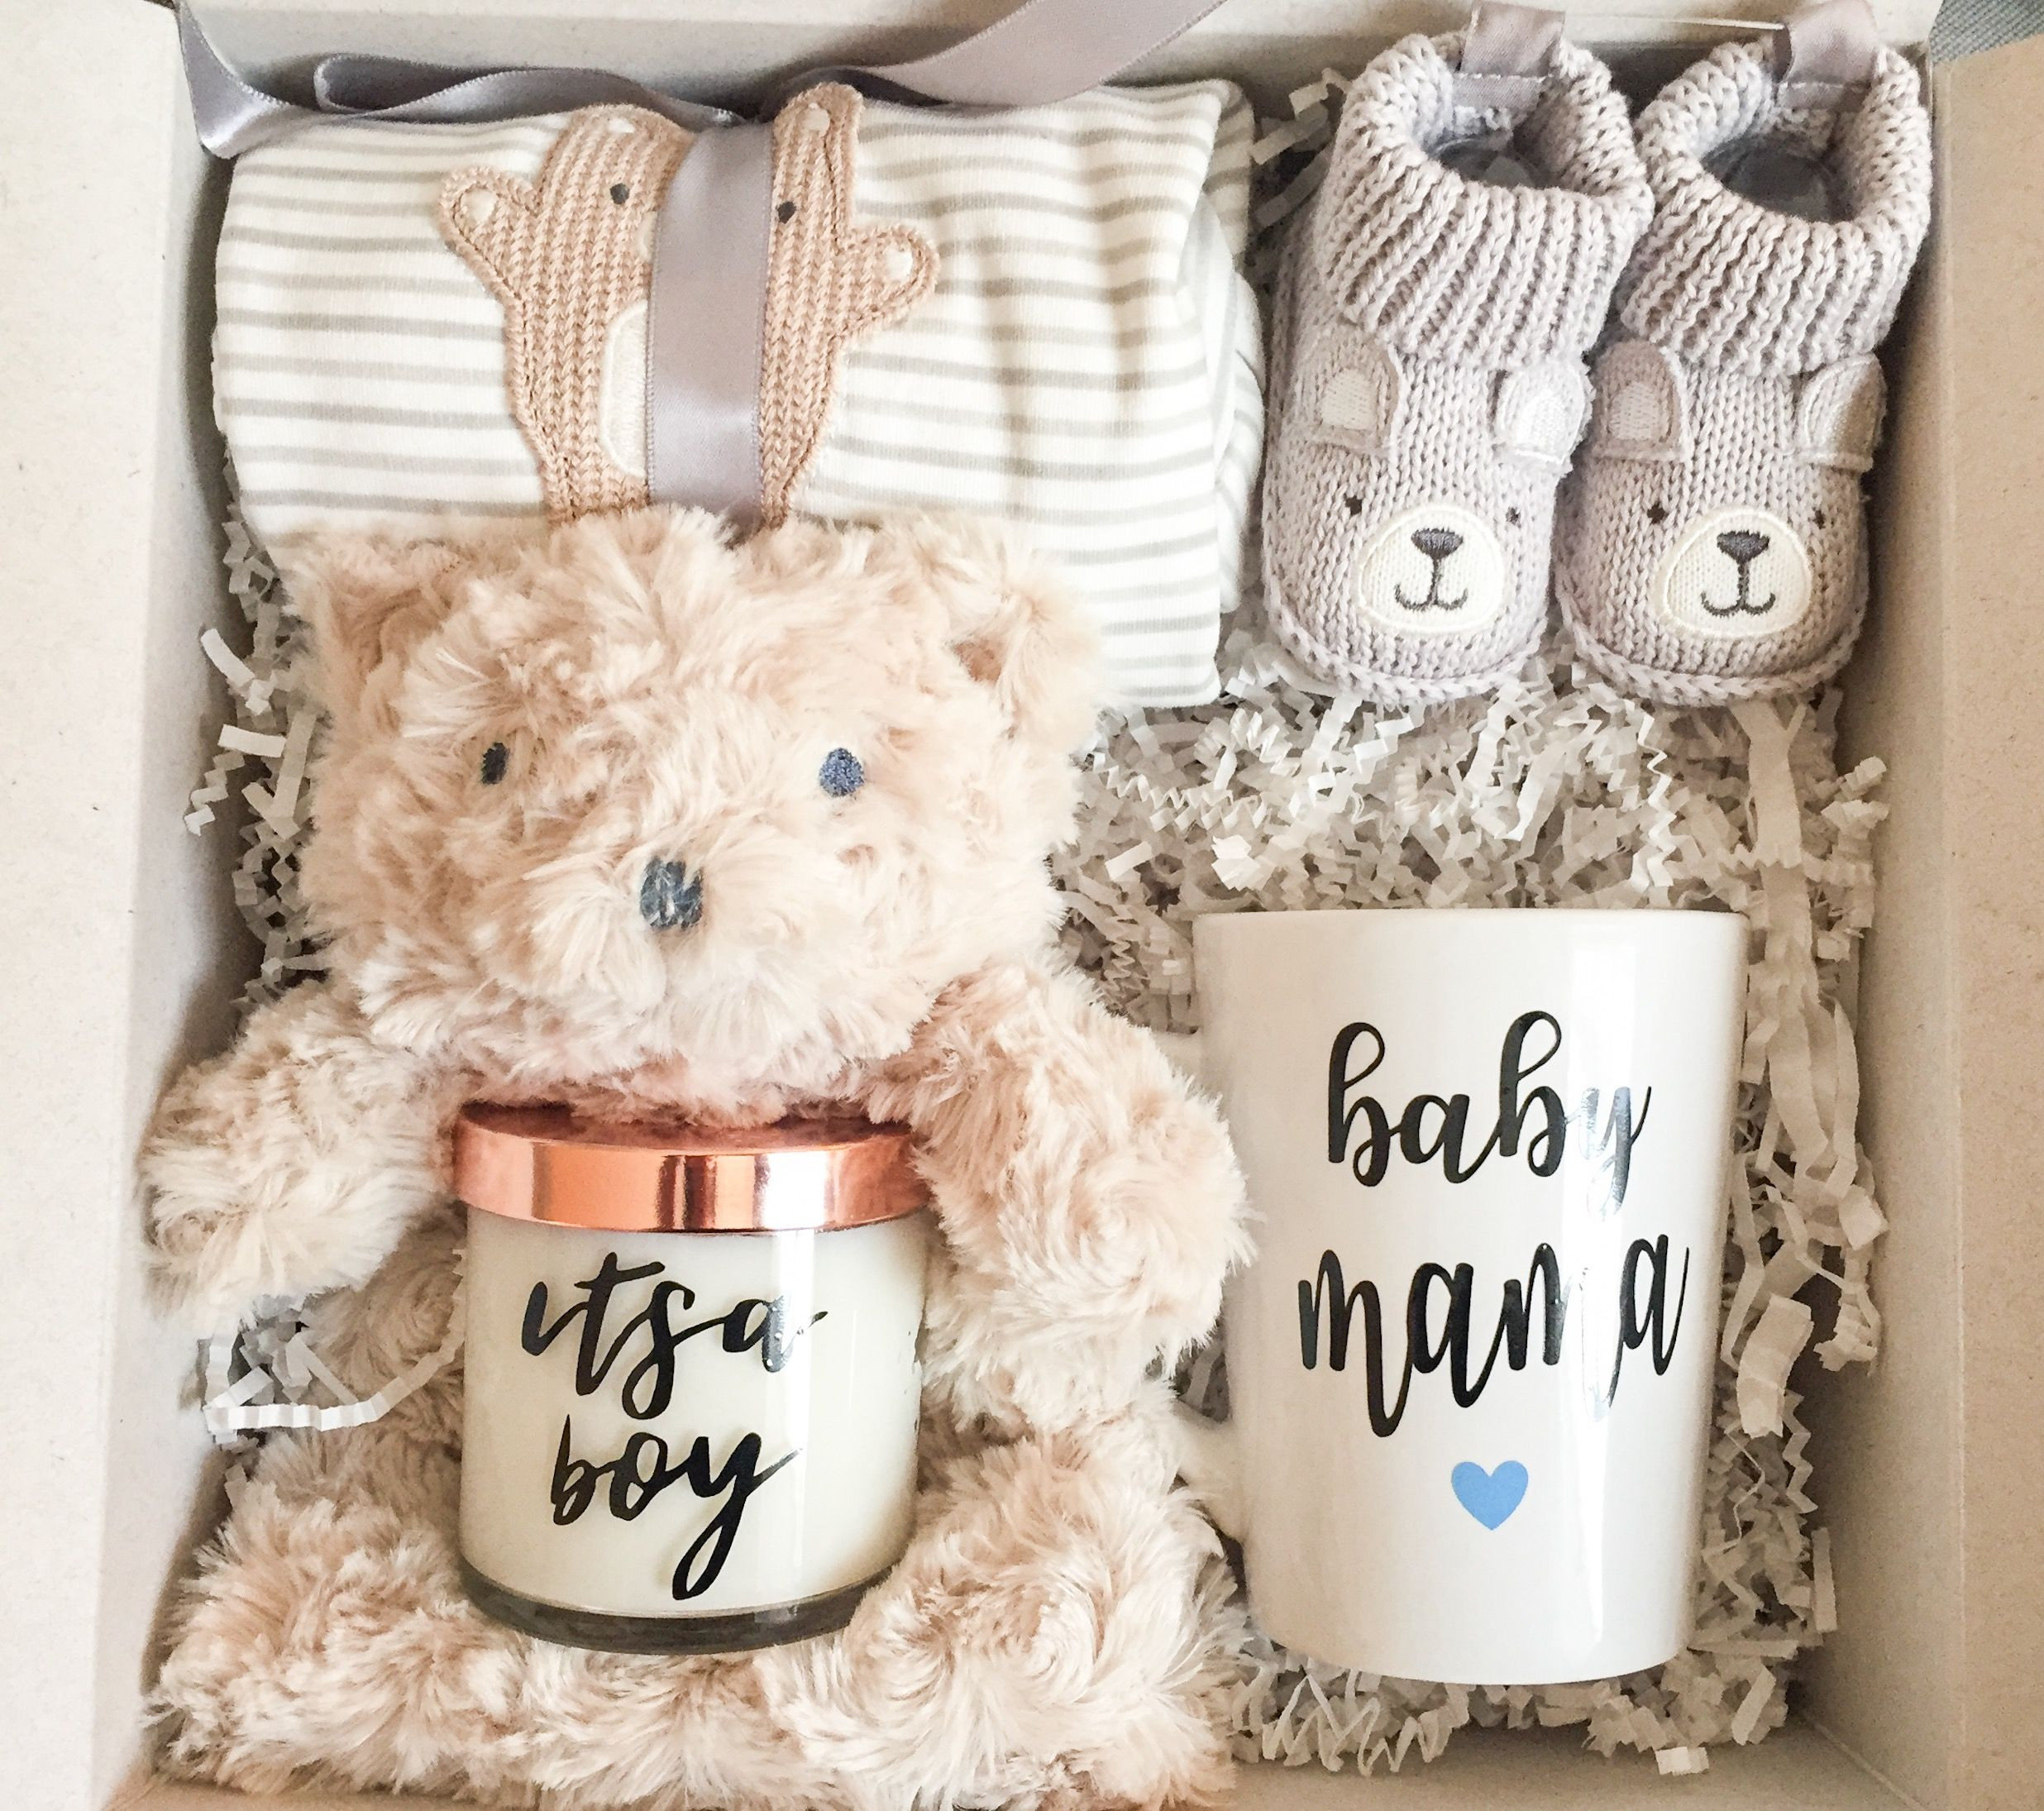 Gift Ideas For Mom To Be At Baby Shower
 It’s a Boy No 1